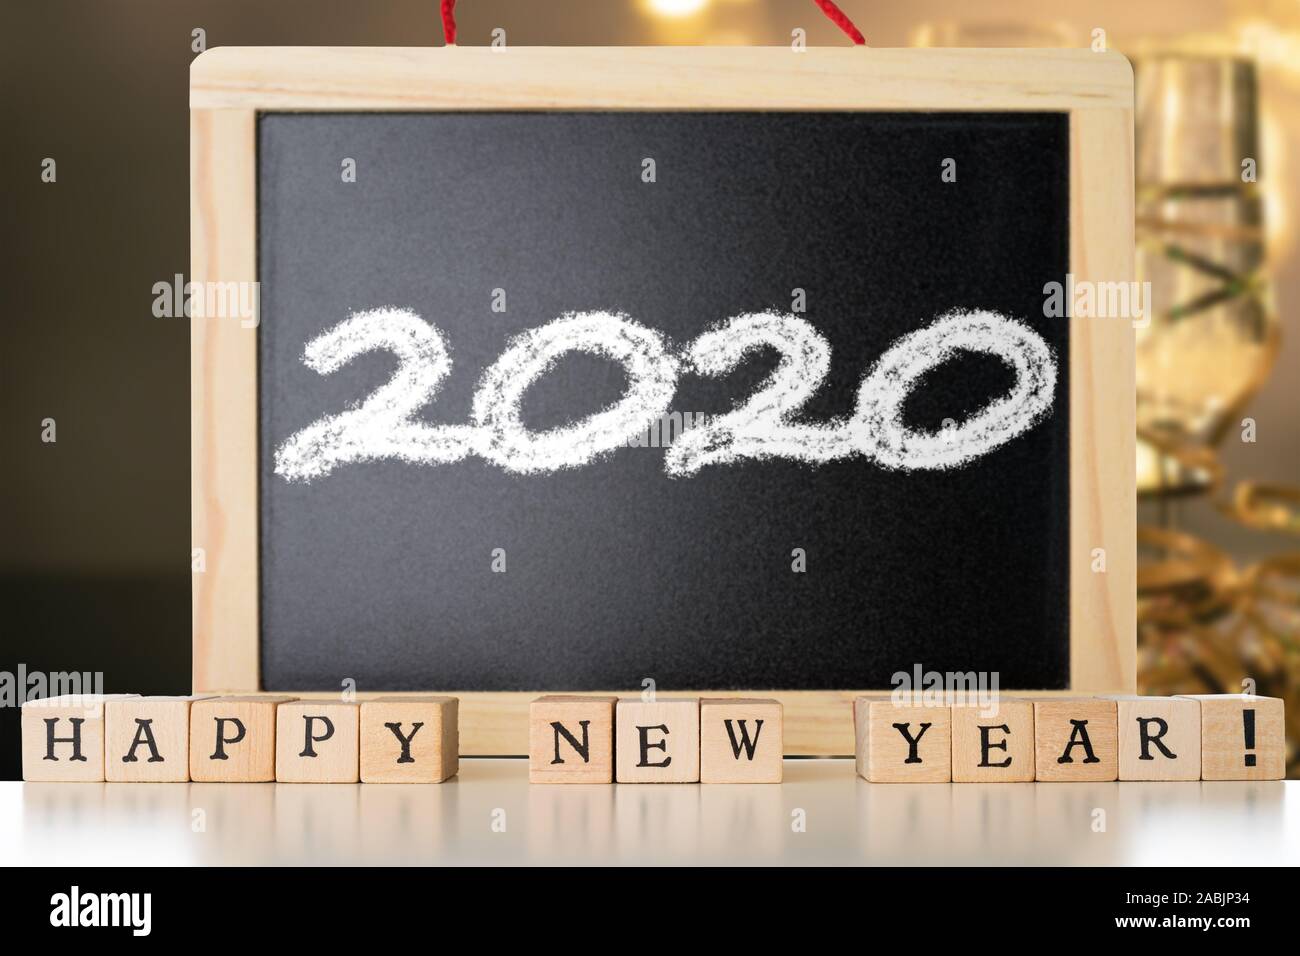 Happy New Year text made out of wooden blocks. Blackboard with 2020 text made with chalk. Two glasses of champane with festive new year's eve decorati Stock Photo